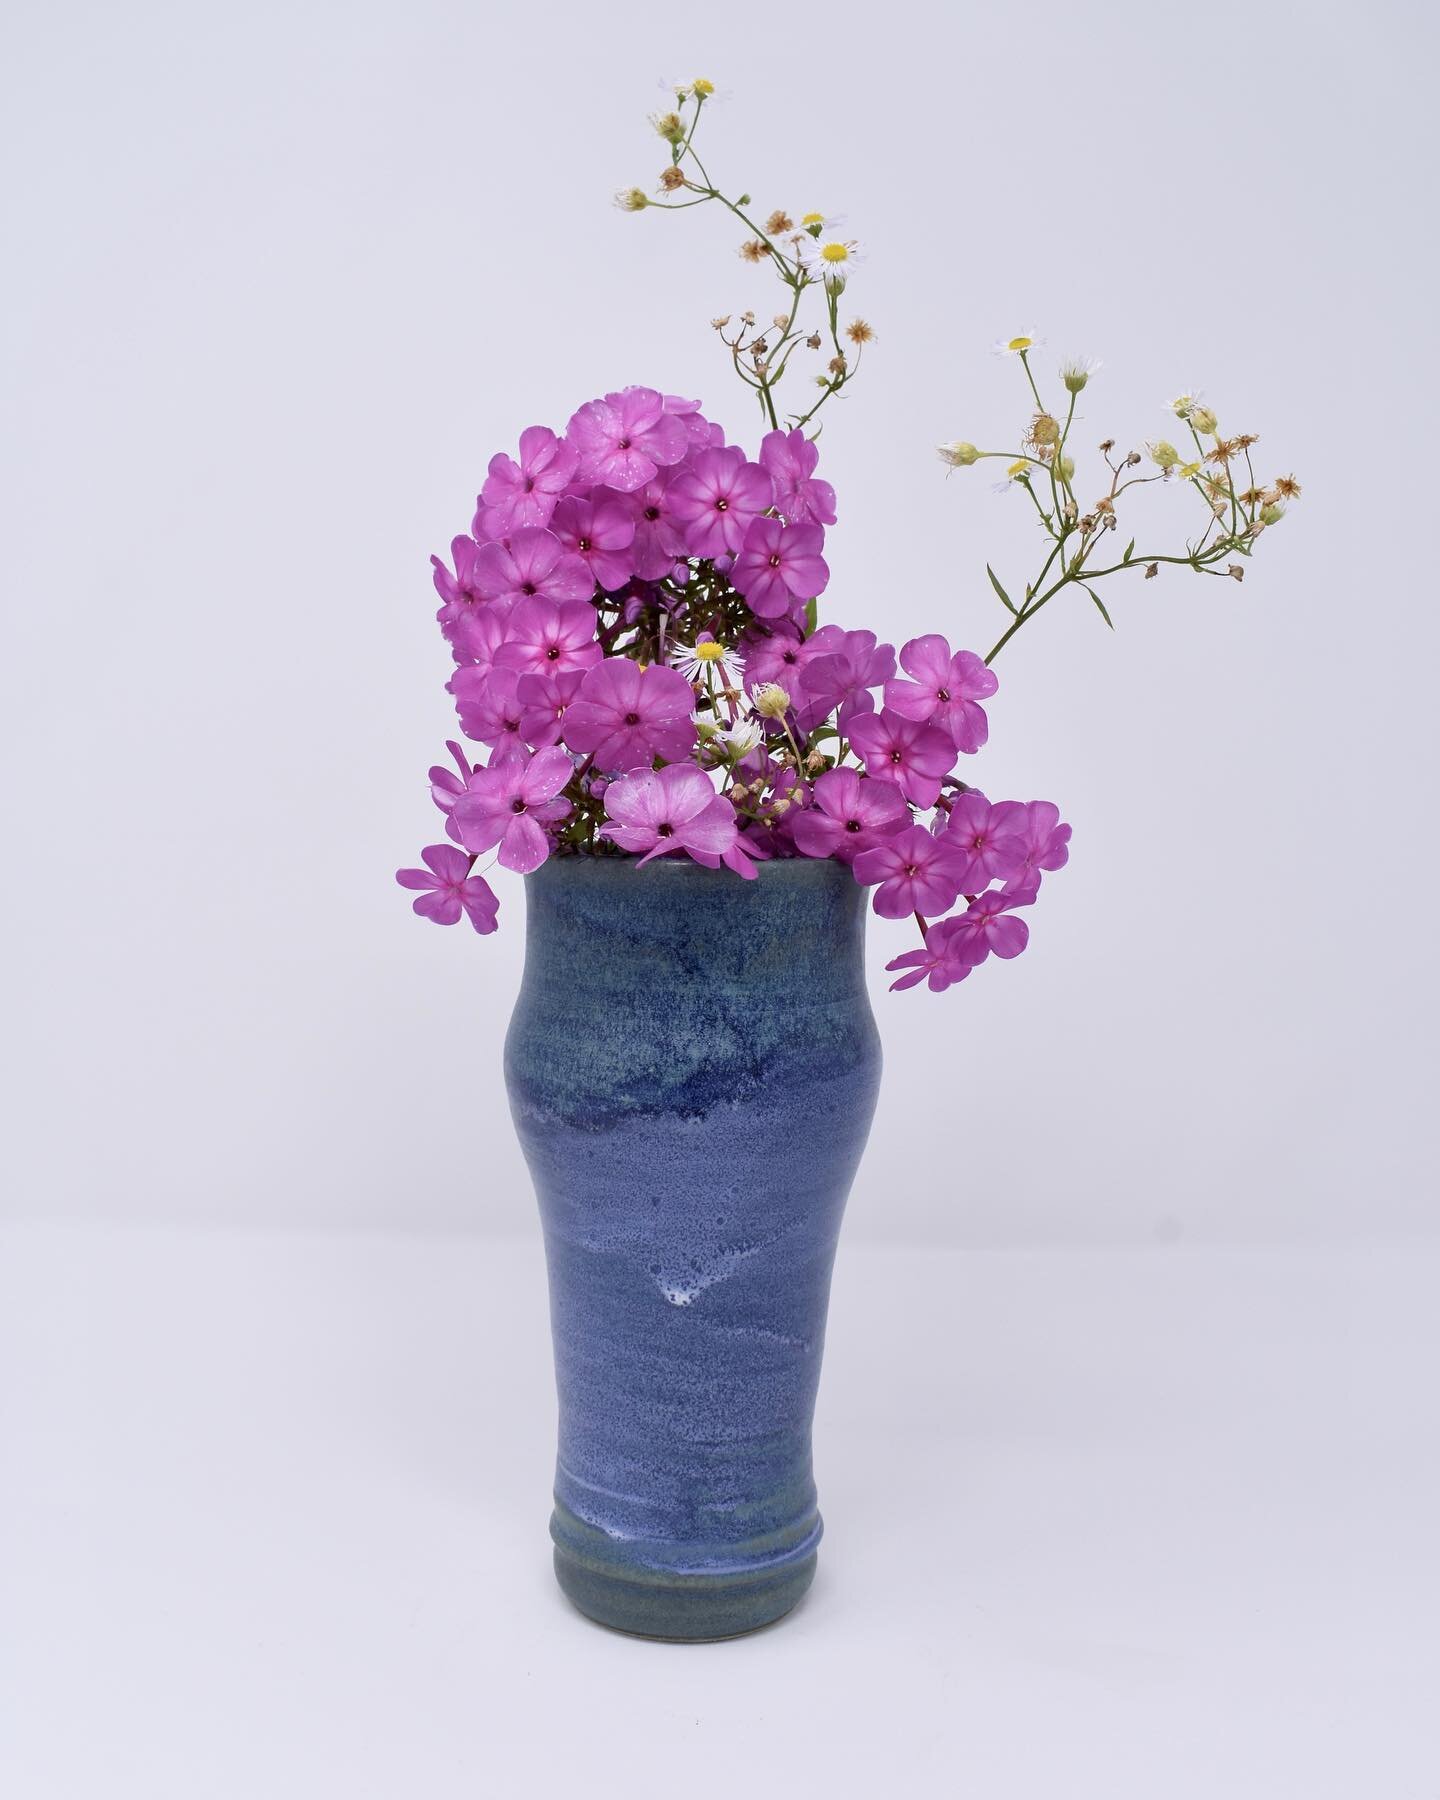 Stealing pollen from the bees to show what these vases can do

#ceramics #ceramicvase #clayvase